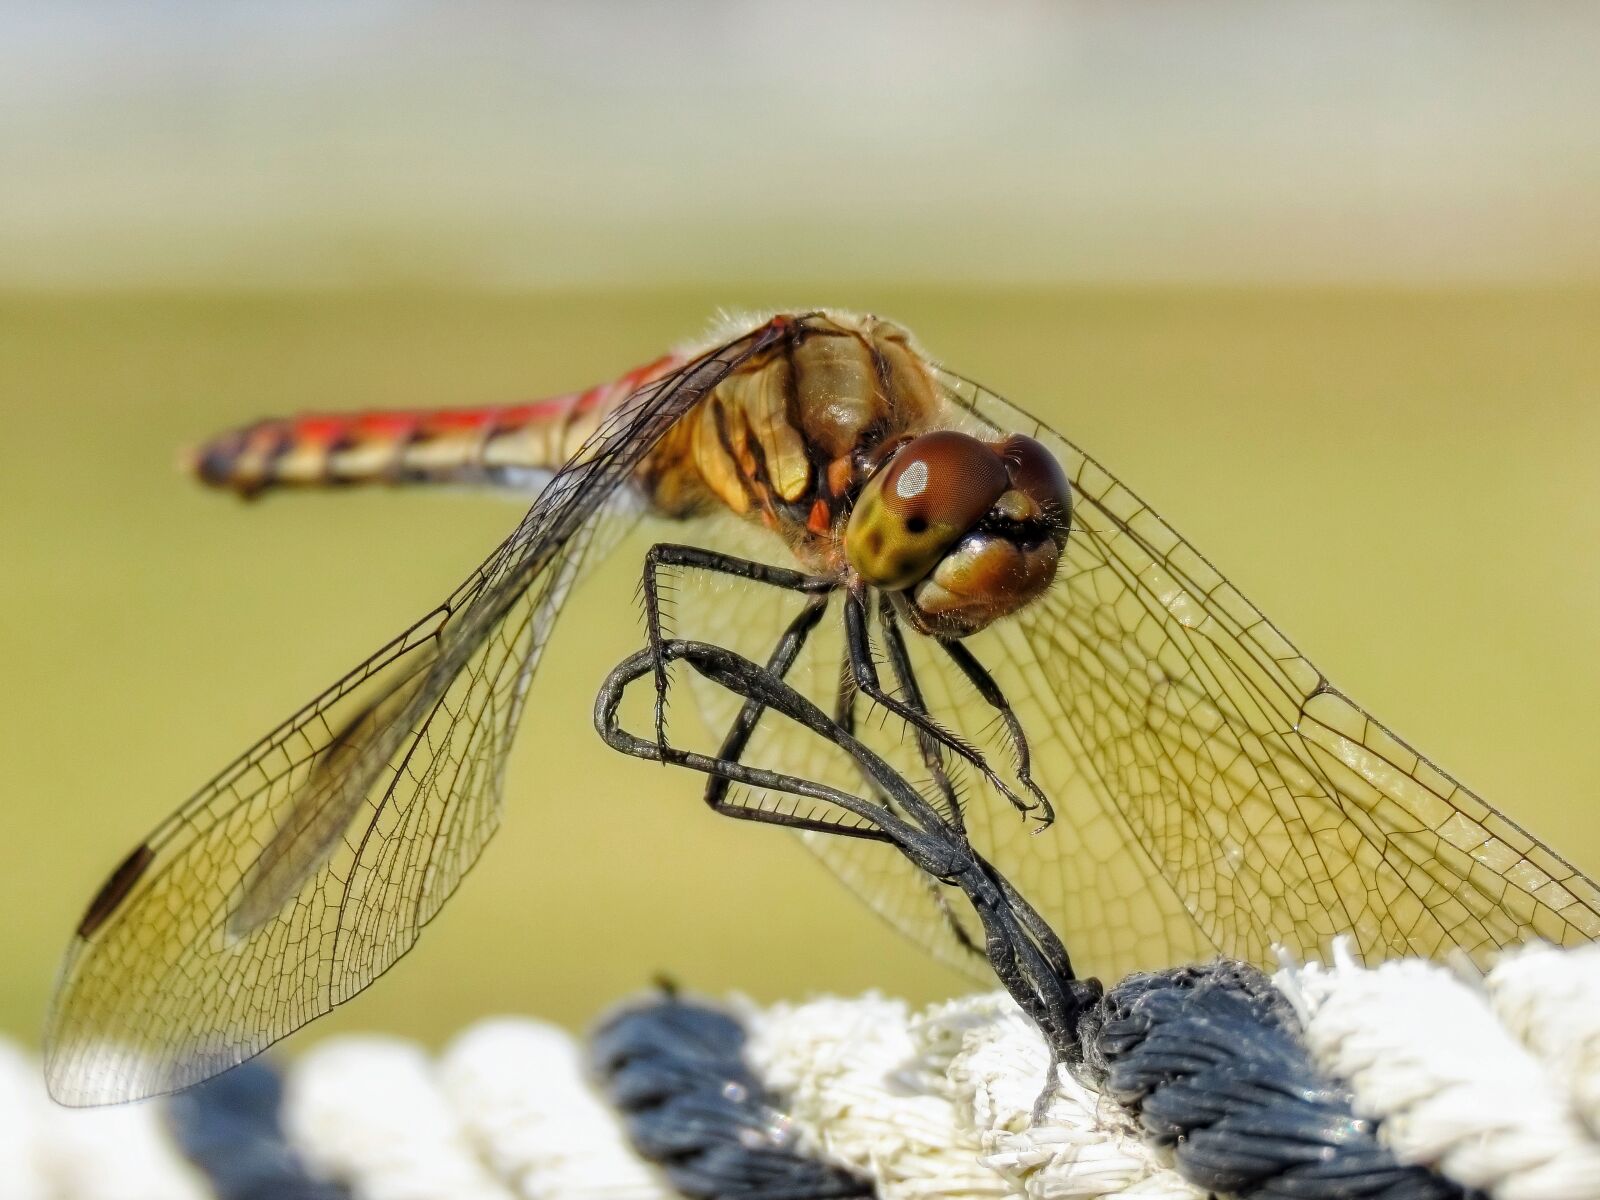 Canon PowerShot SX70 HS sample photo. Insect, rope, dragonfly photography